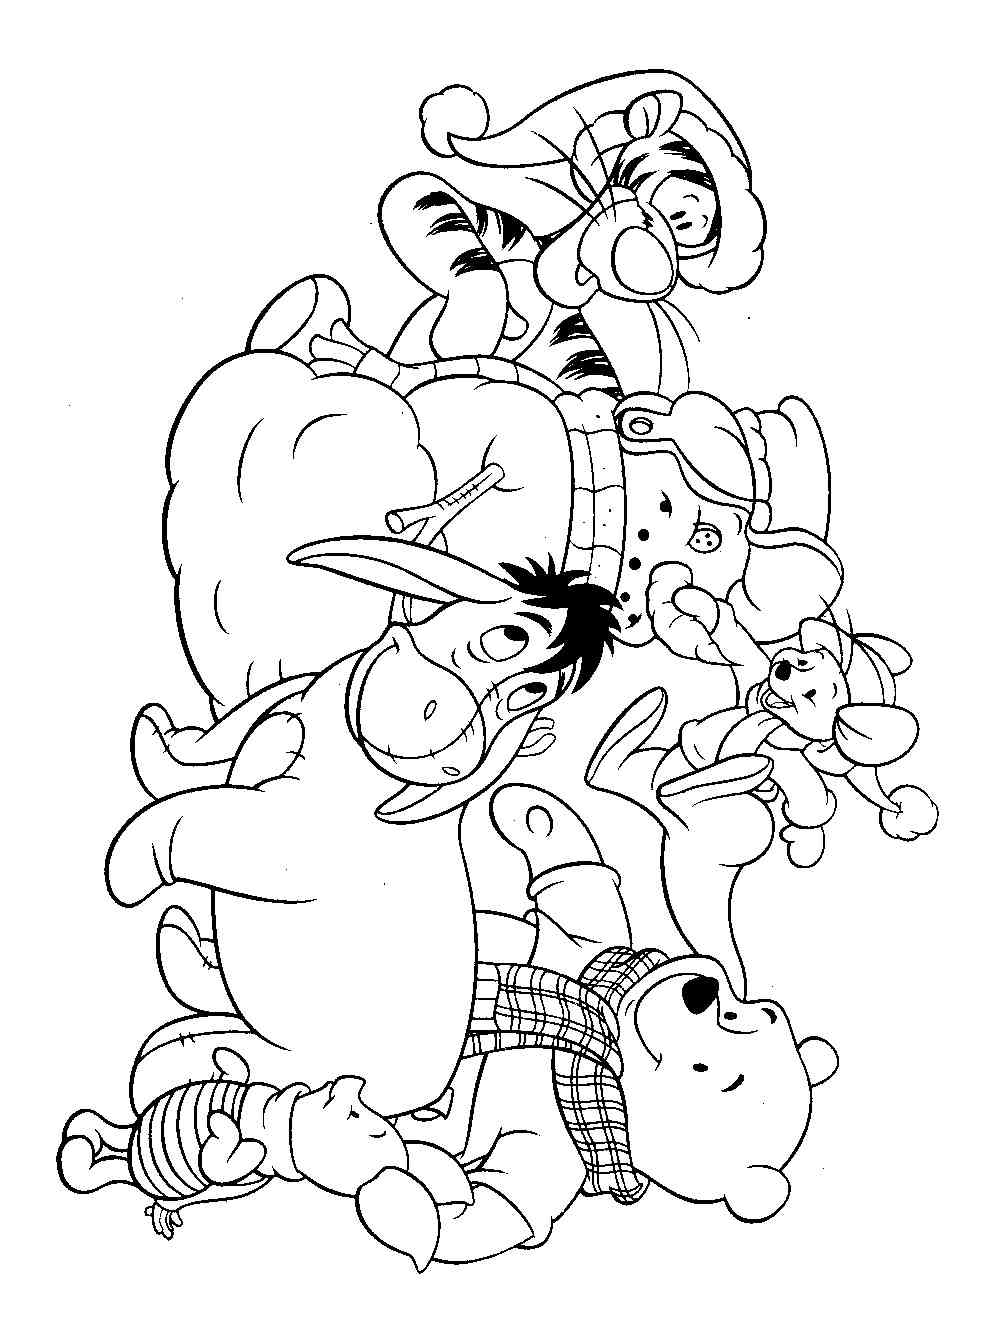 Disney Christmas 8 coloring page